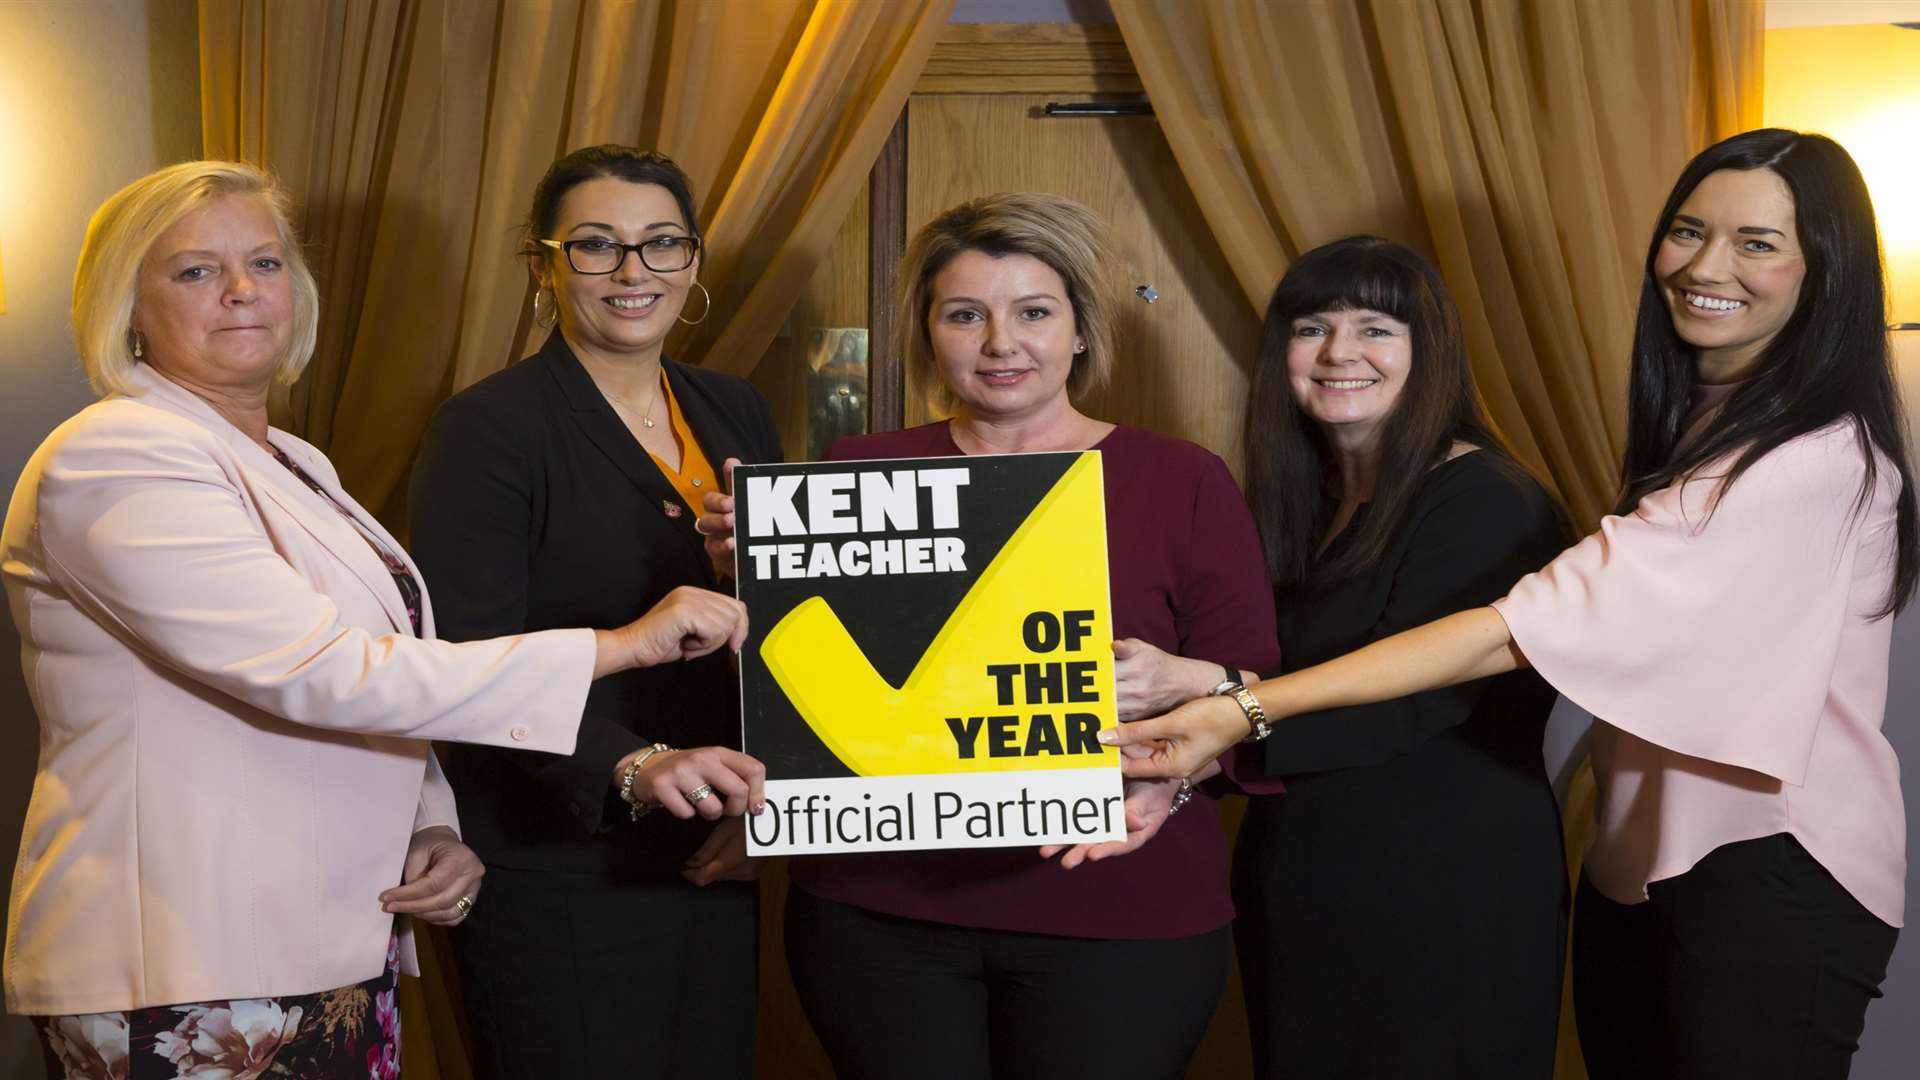 Debbie Lloyd from CXK , Leah Macdonald from Three R's Teacher Recruitment, Kirsty Hawkins from Social Enterprise Kent, Alison Cogger from Canterbury Christ Church University, and Julia Inshaw from CXK show their support for the Kent Teacher of the Year Awards 2018.